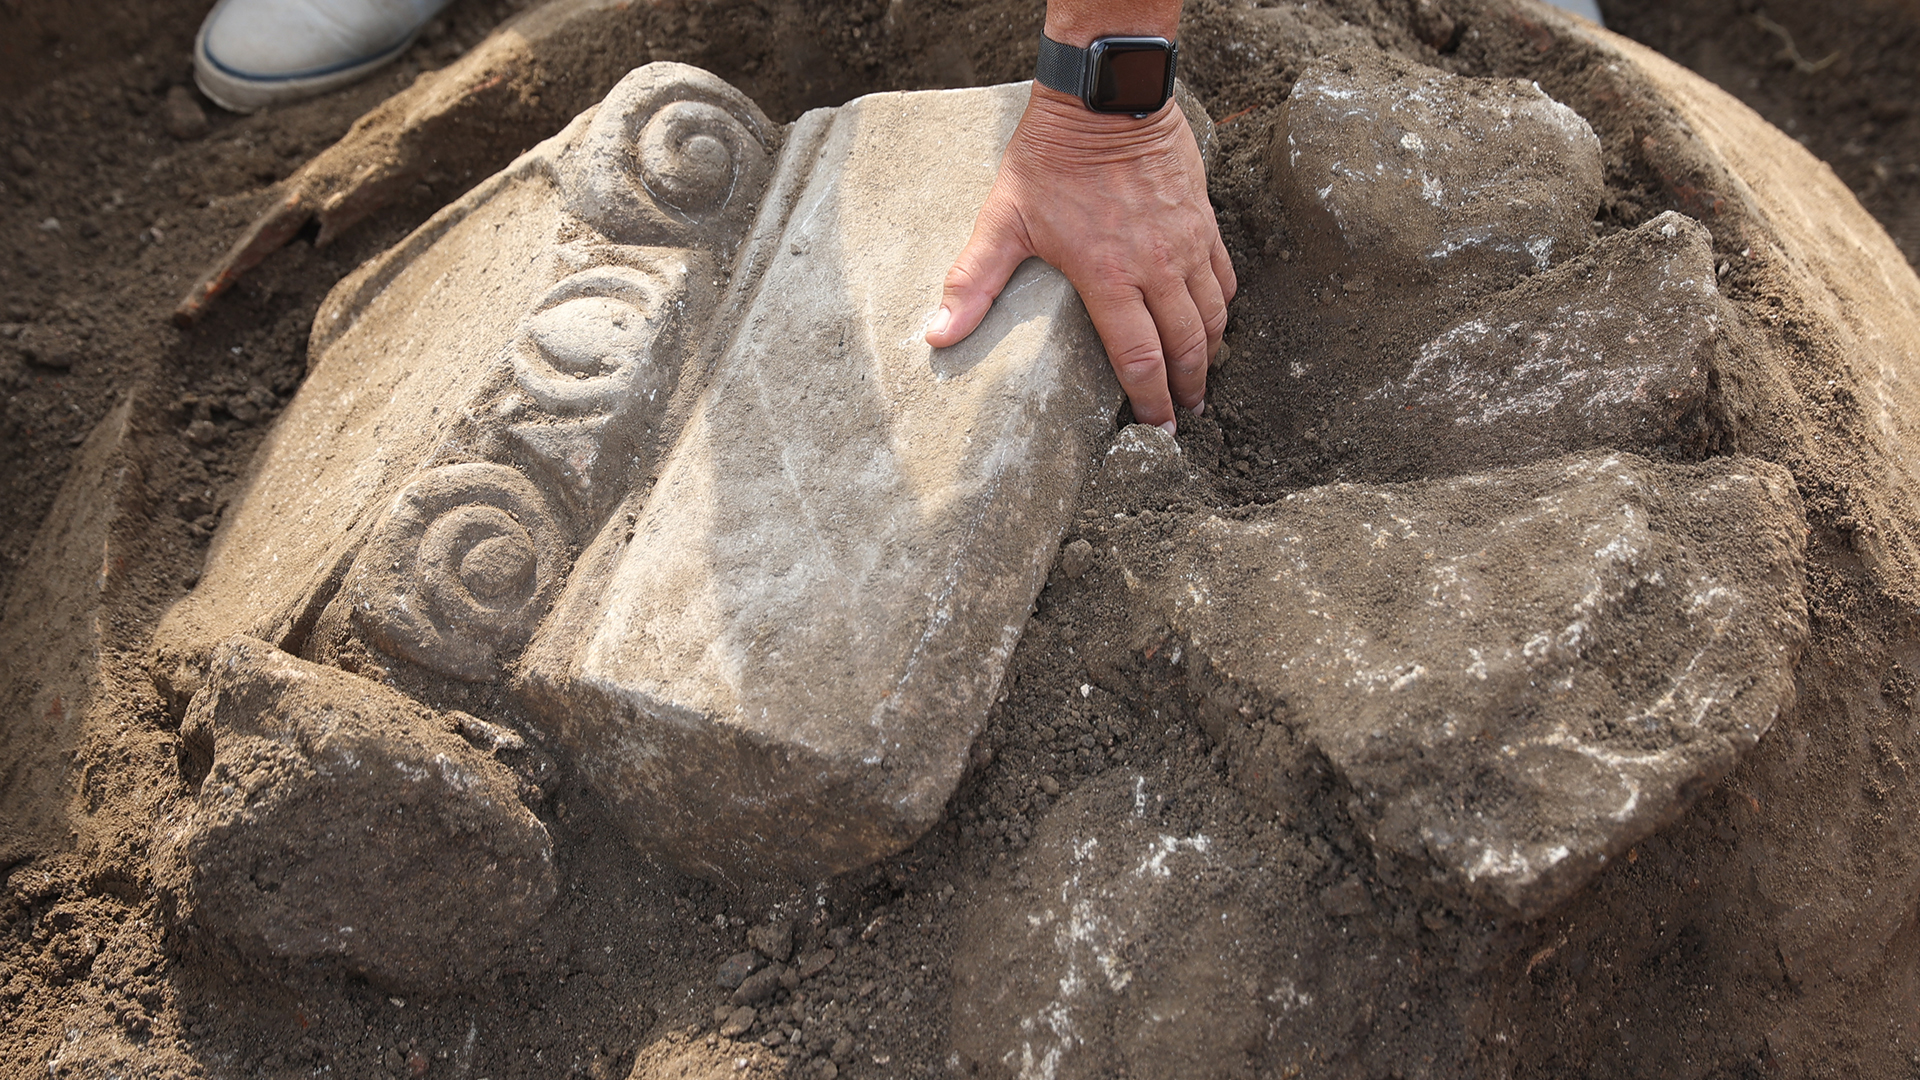 The archaeological team thinks that the synagogue was built in the first century B.C. perhaps more than 100 years before the destruction of Jerusalem's Second Temple.